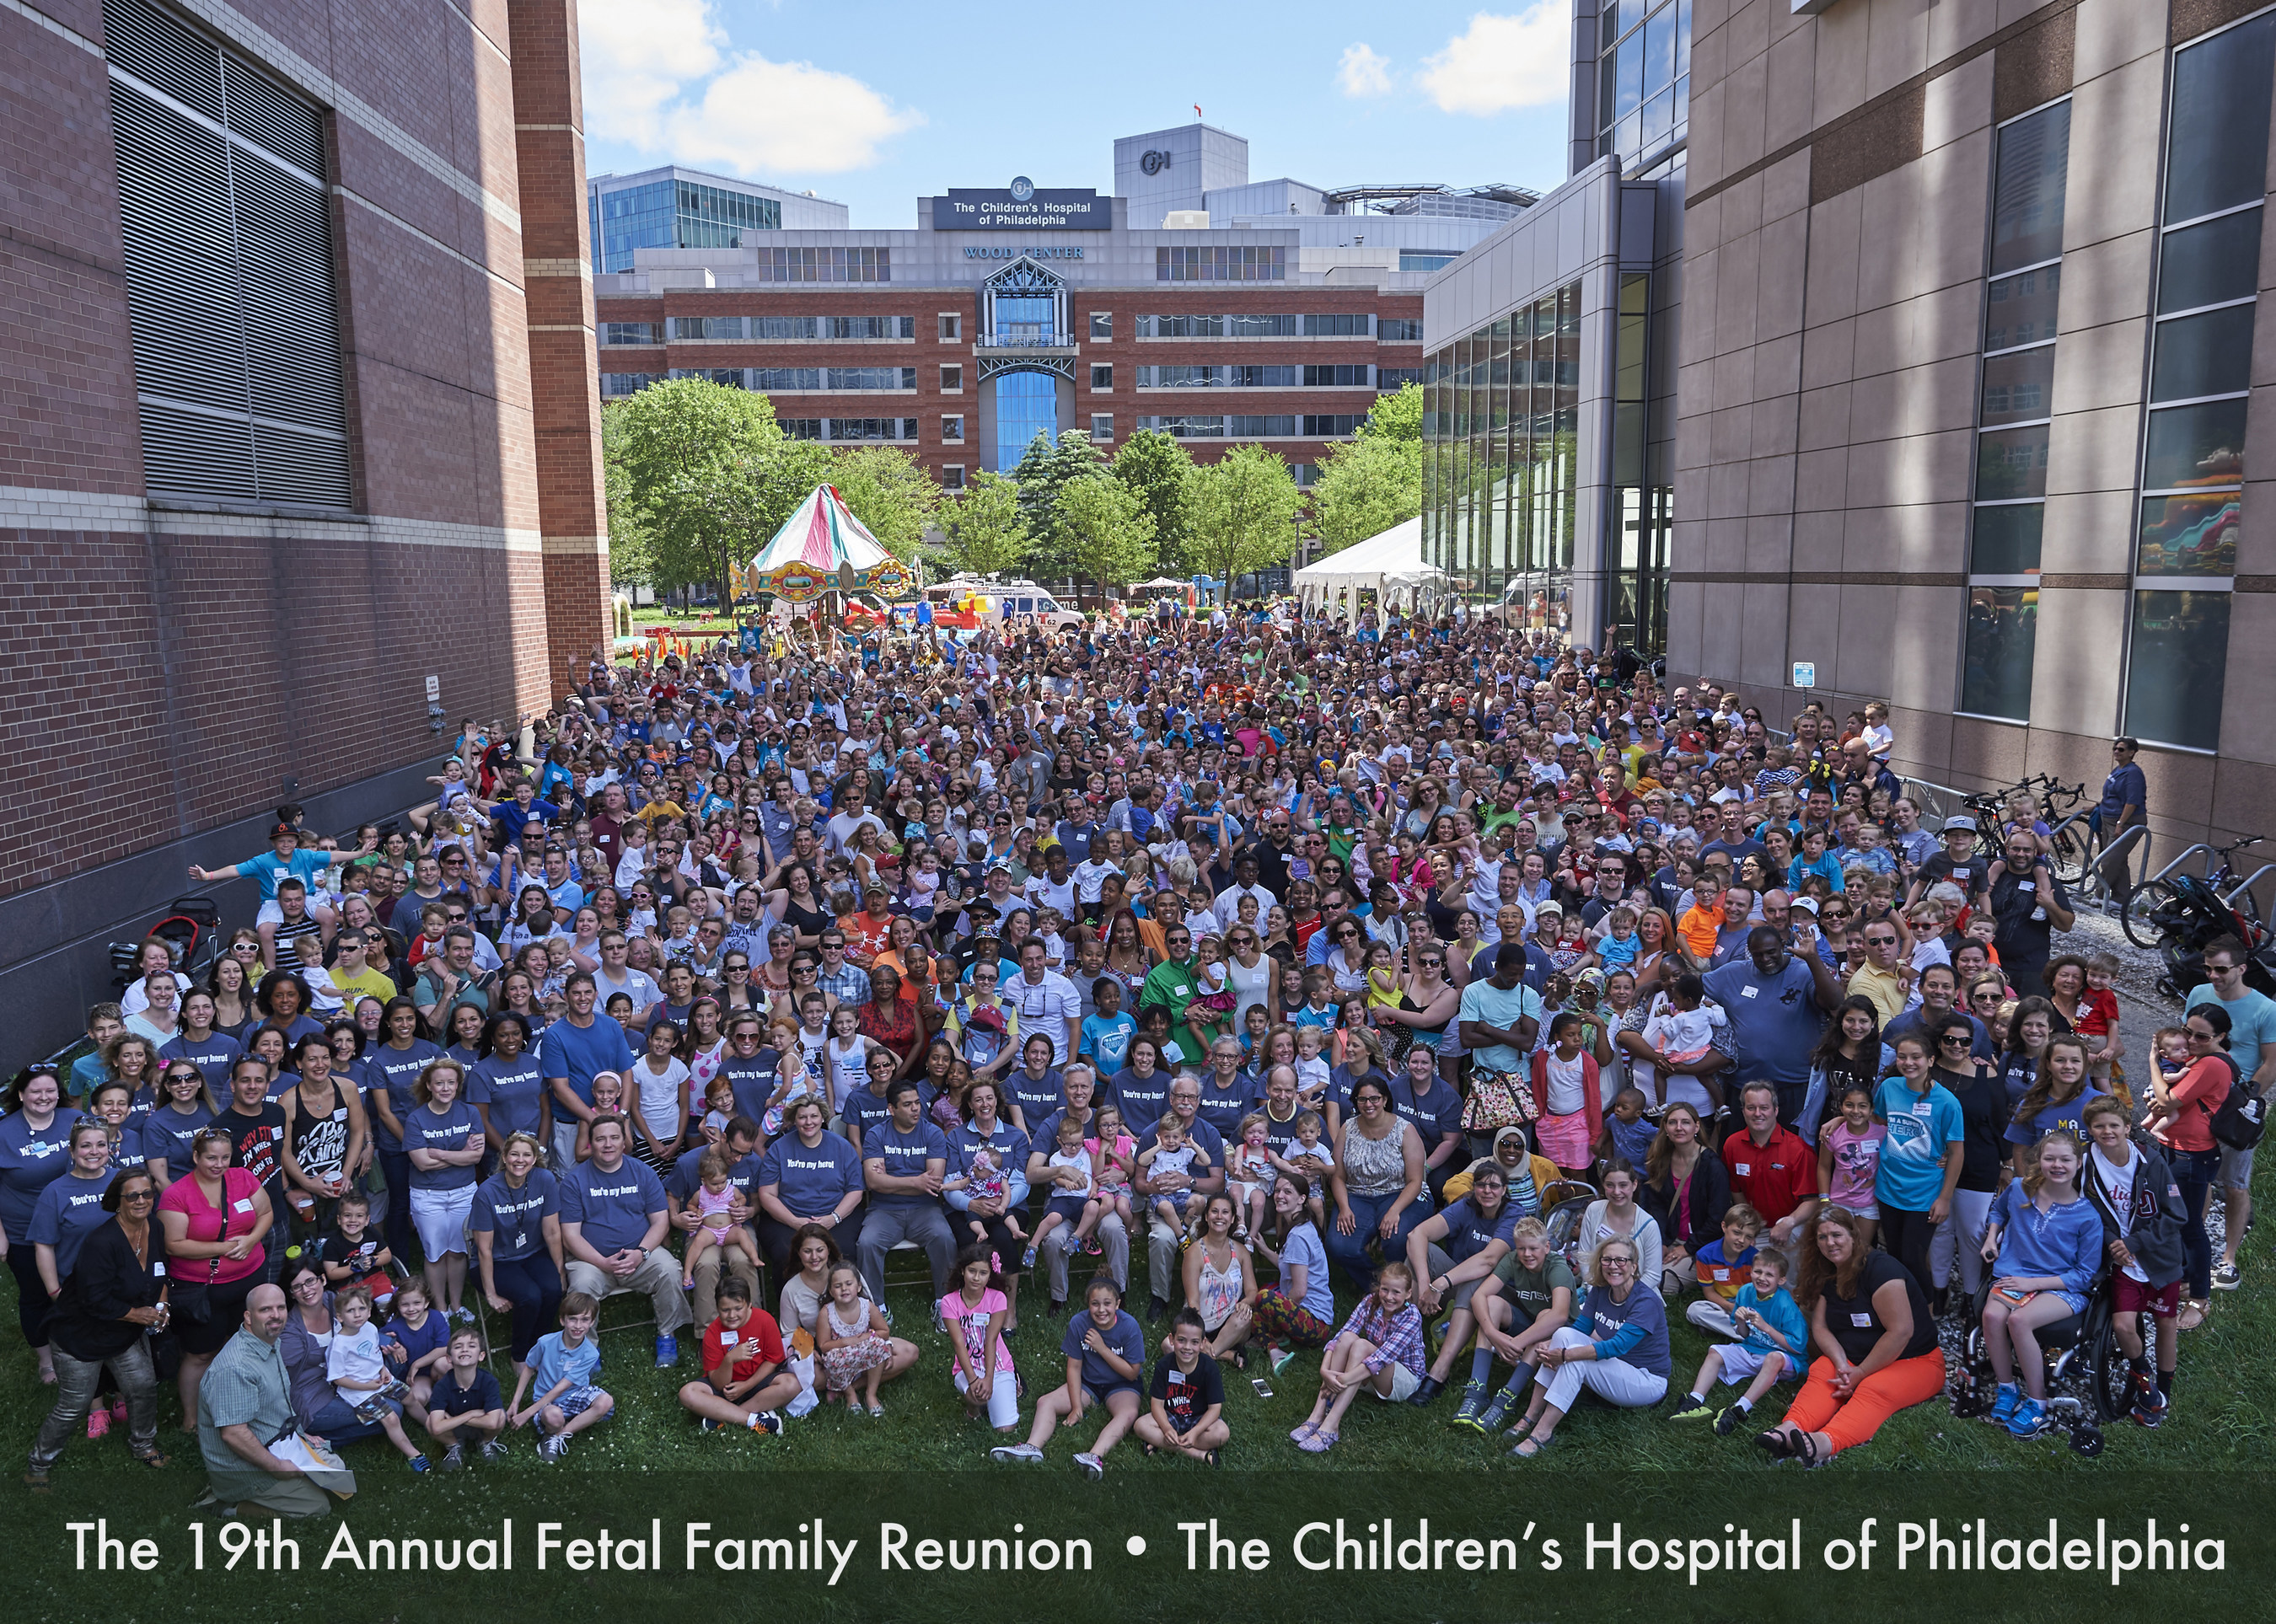 The Children's Hospital of Philadelphia's 19th Annual Fetal Surgery Family Reunion Gathers Families from Across the U.S.